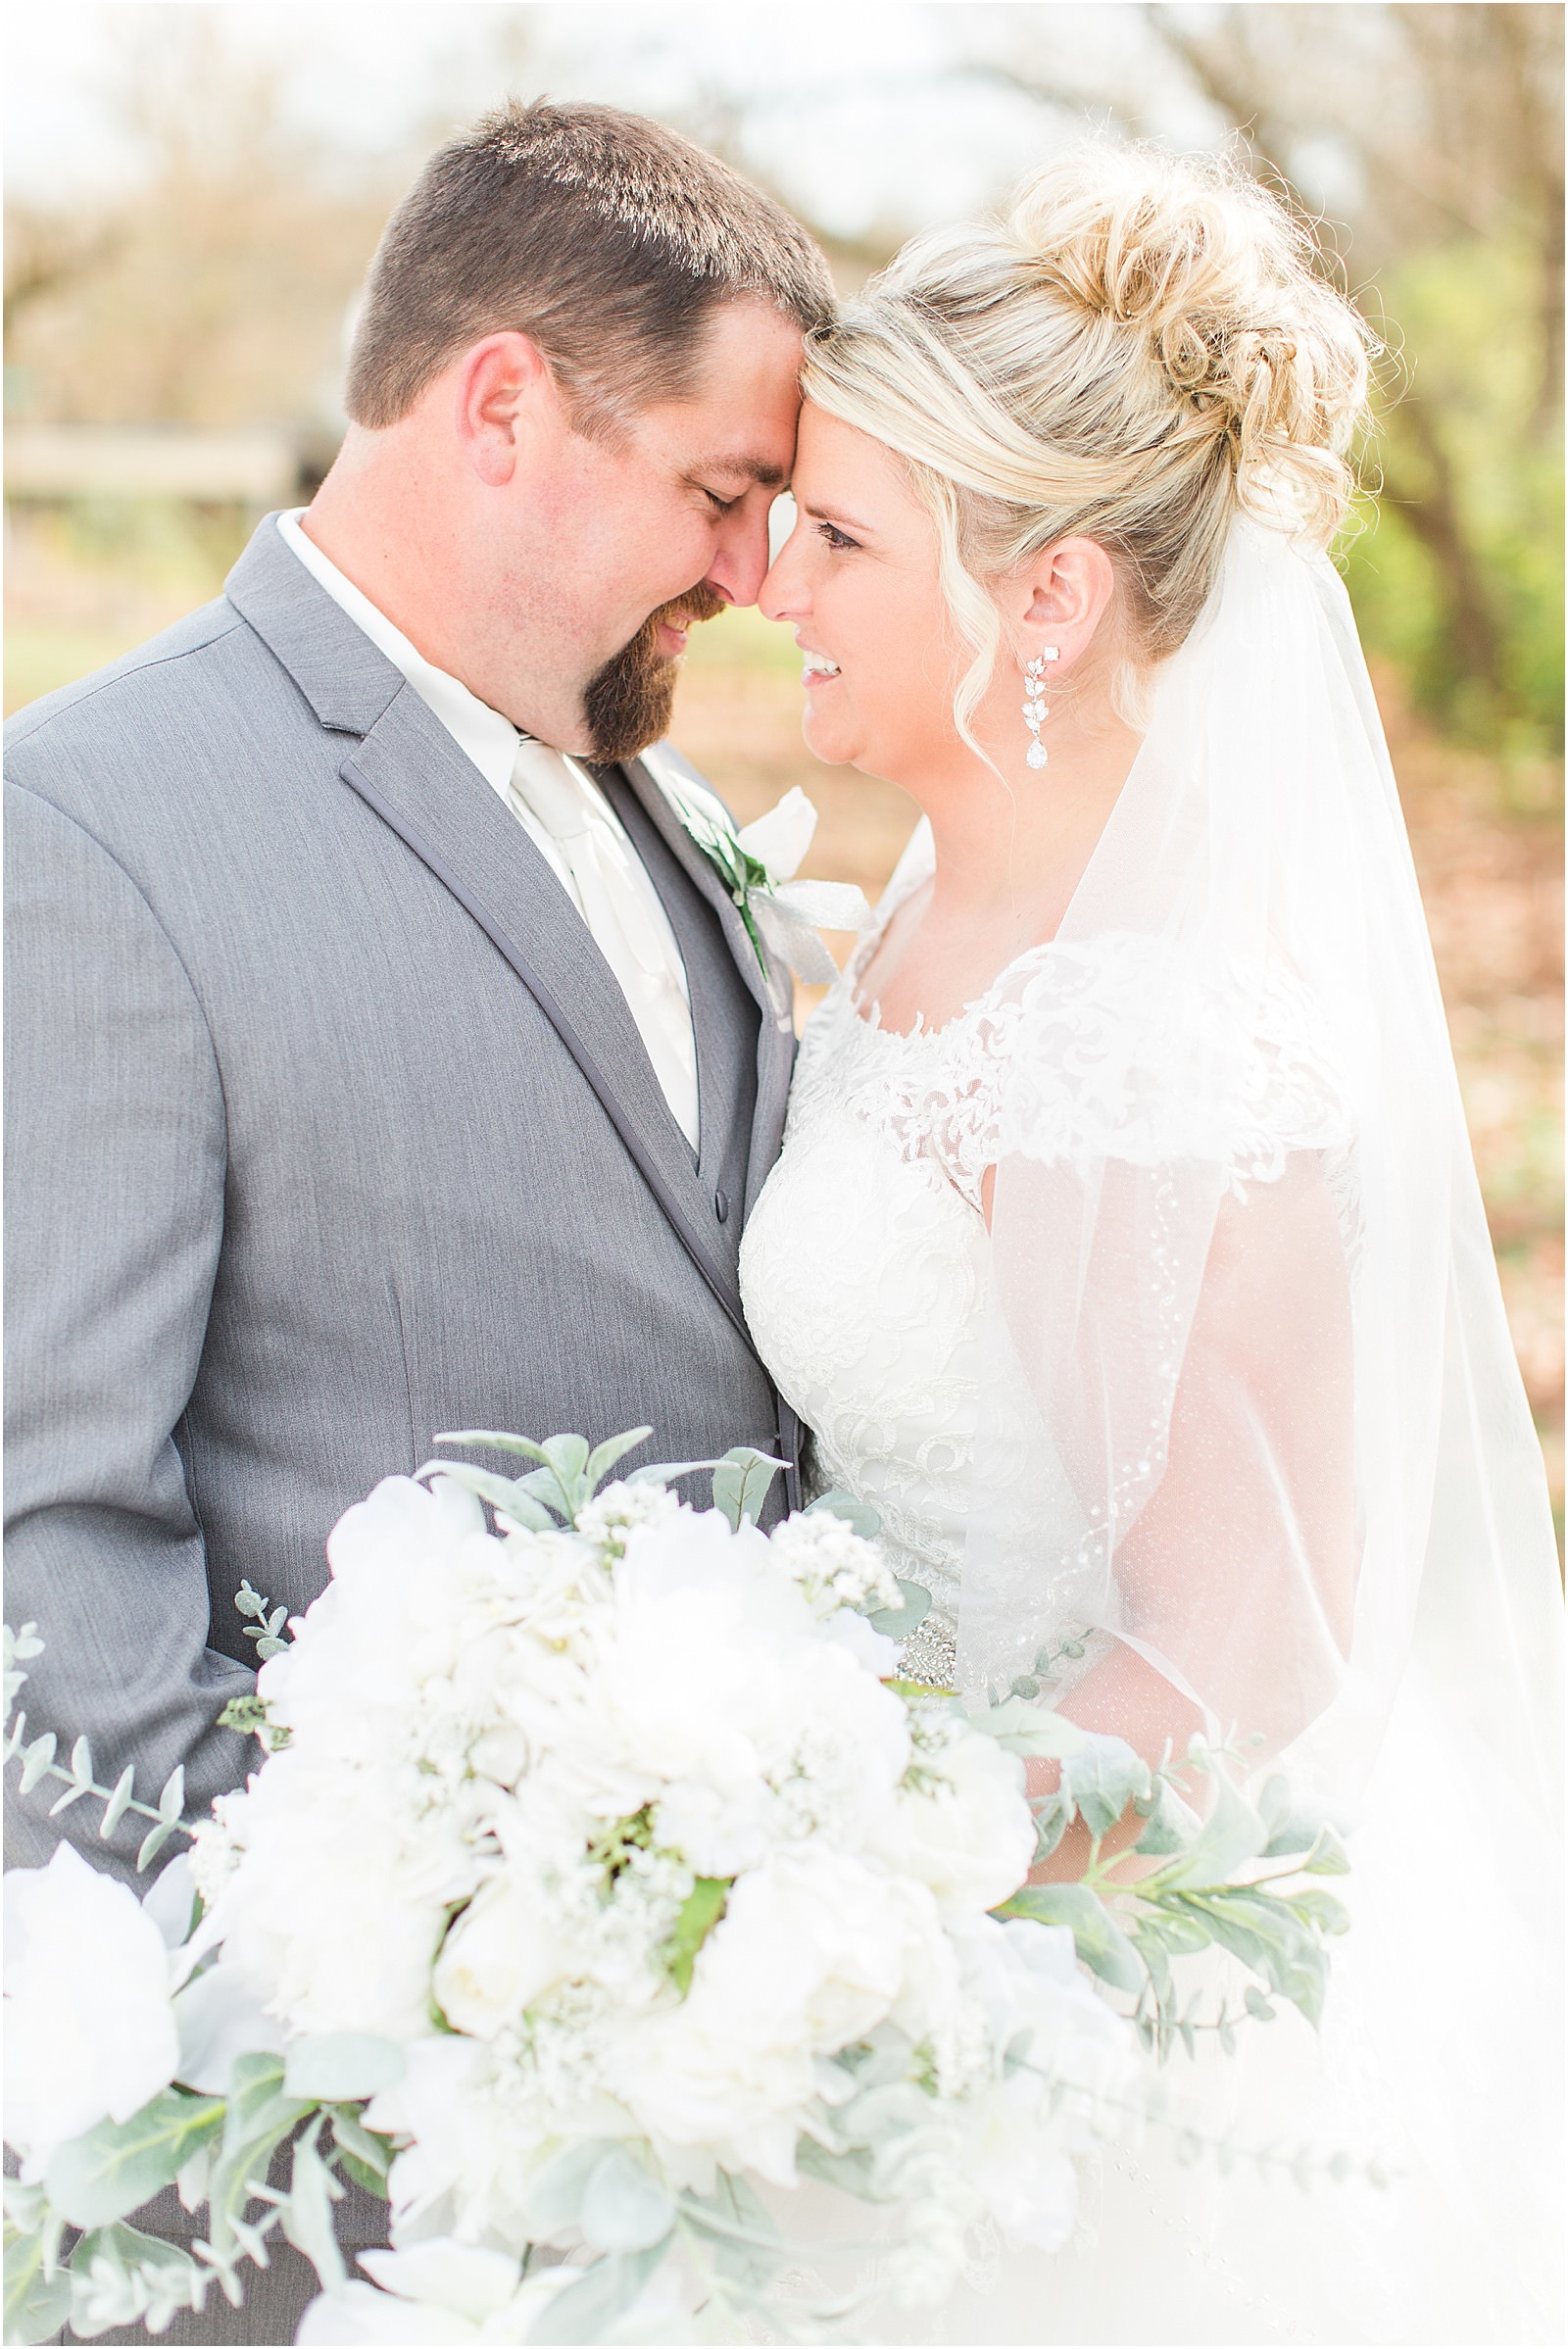 A Navy and Blush Wedding in Tell City Indiana | Brianna and Matt | Bret and Brandie Photography 0097.jpg